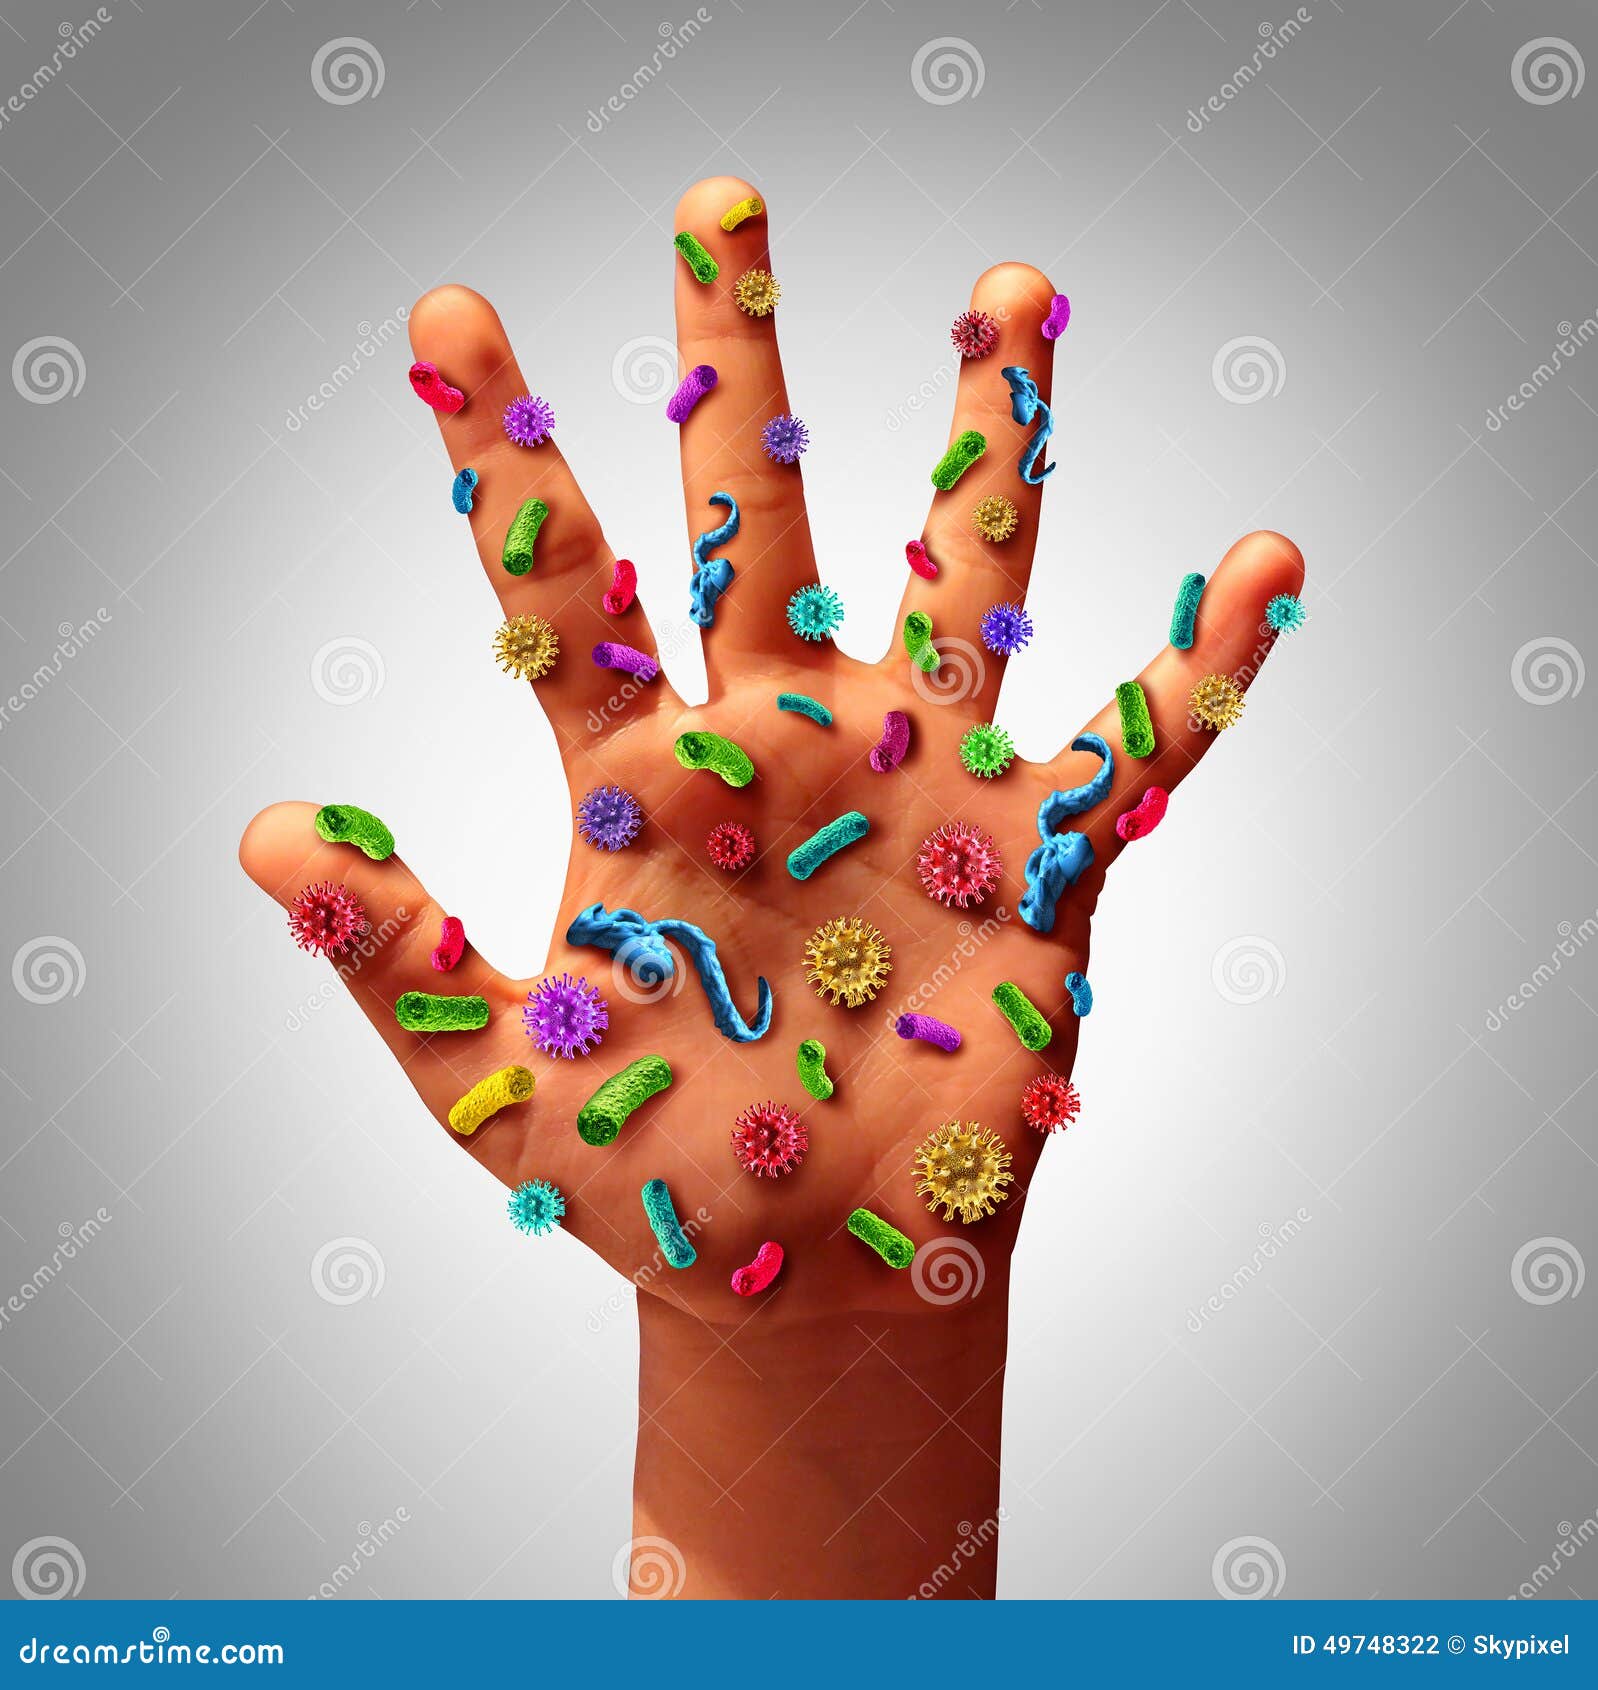 hand germs